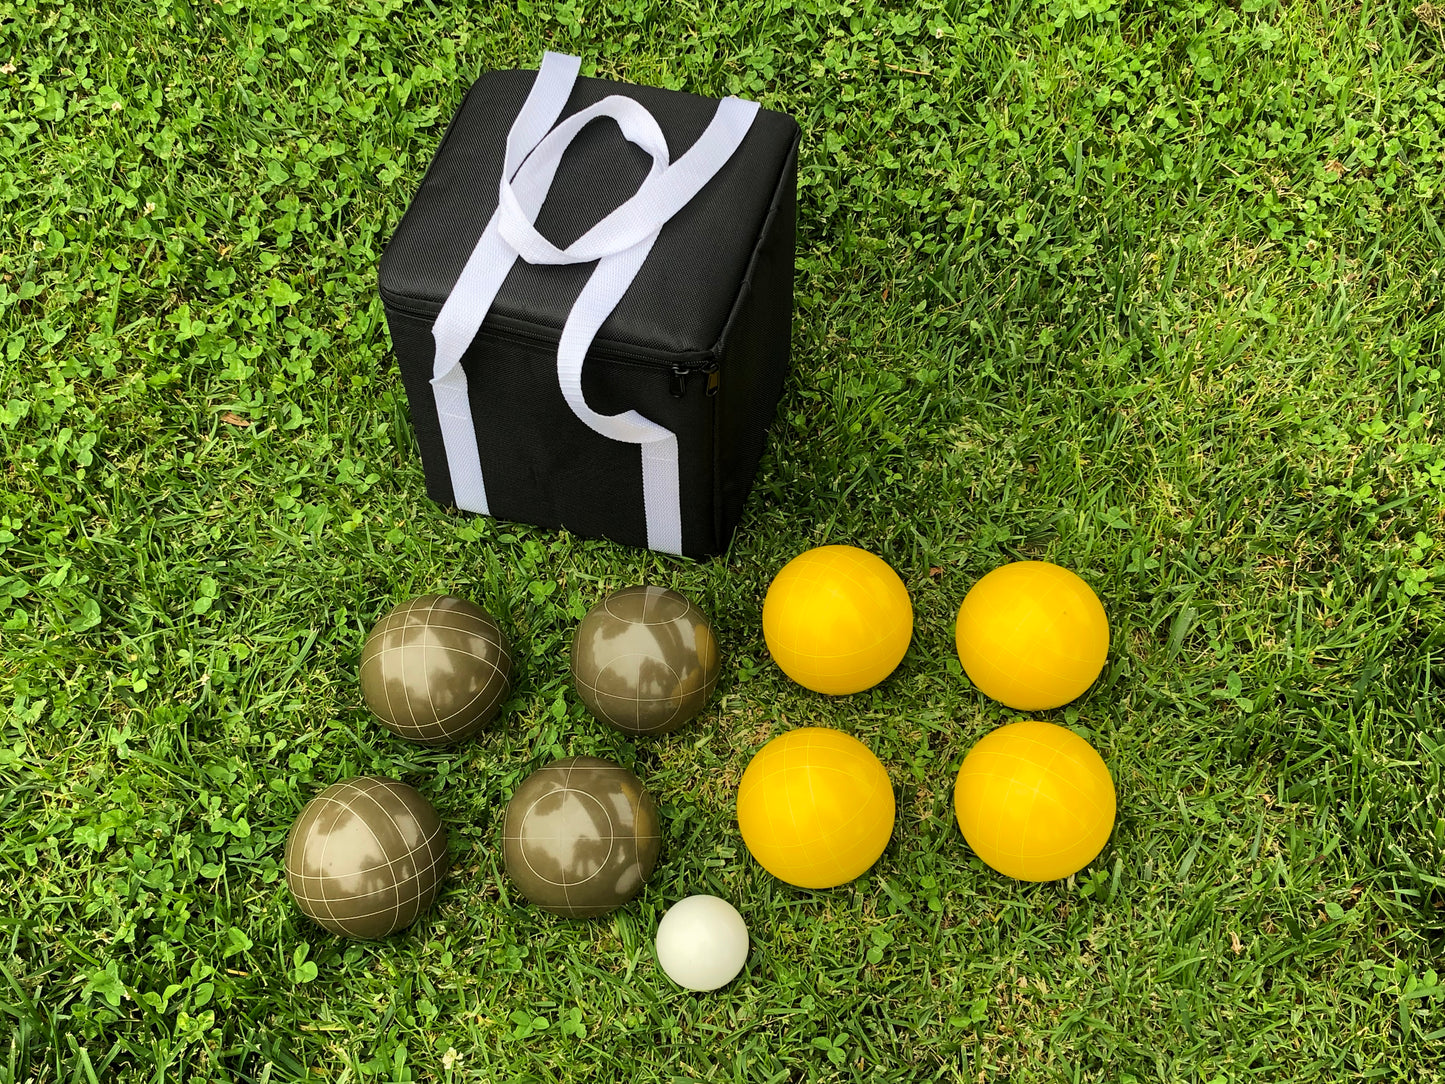 107mm Bocce Olive Brown and Yellow Balls with Black Bag